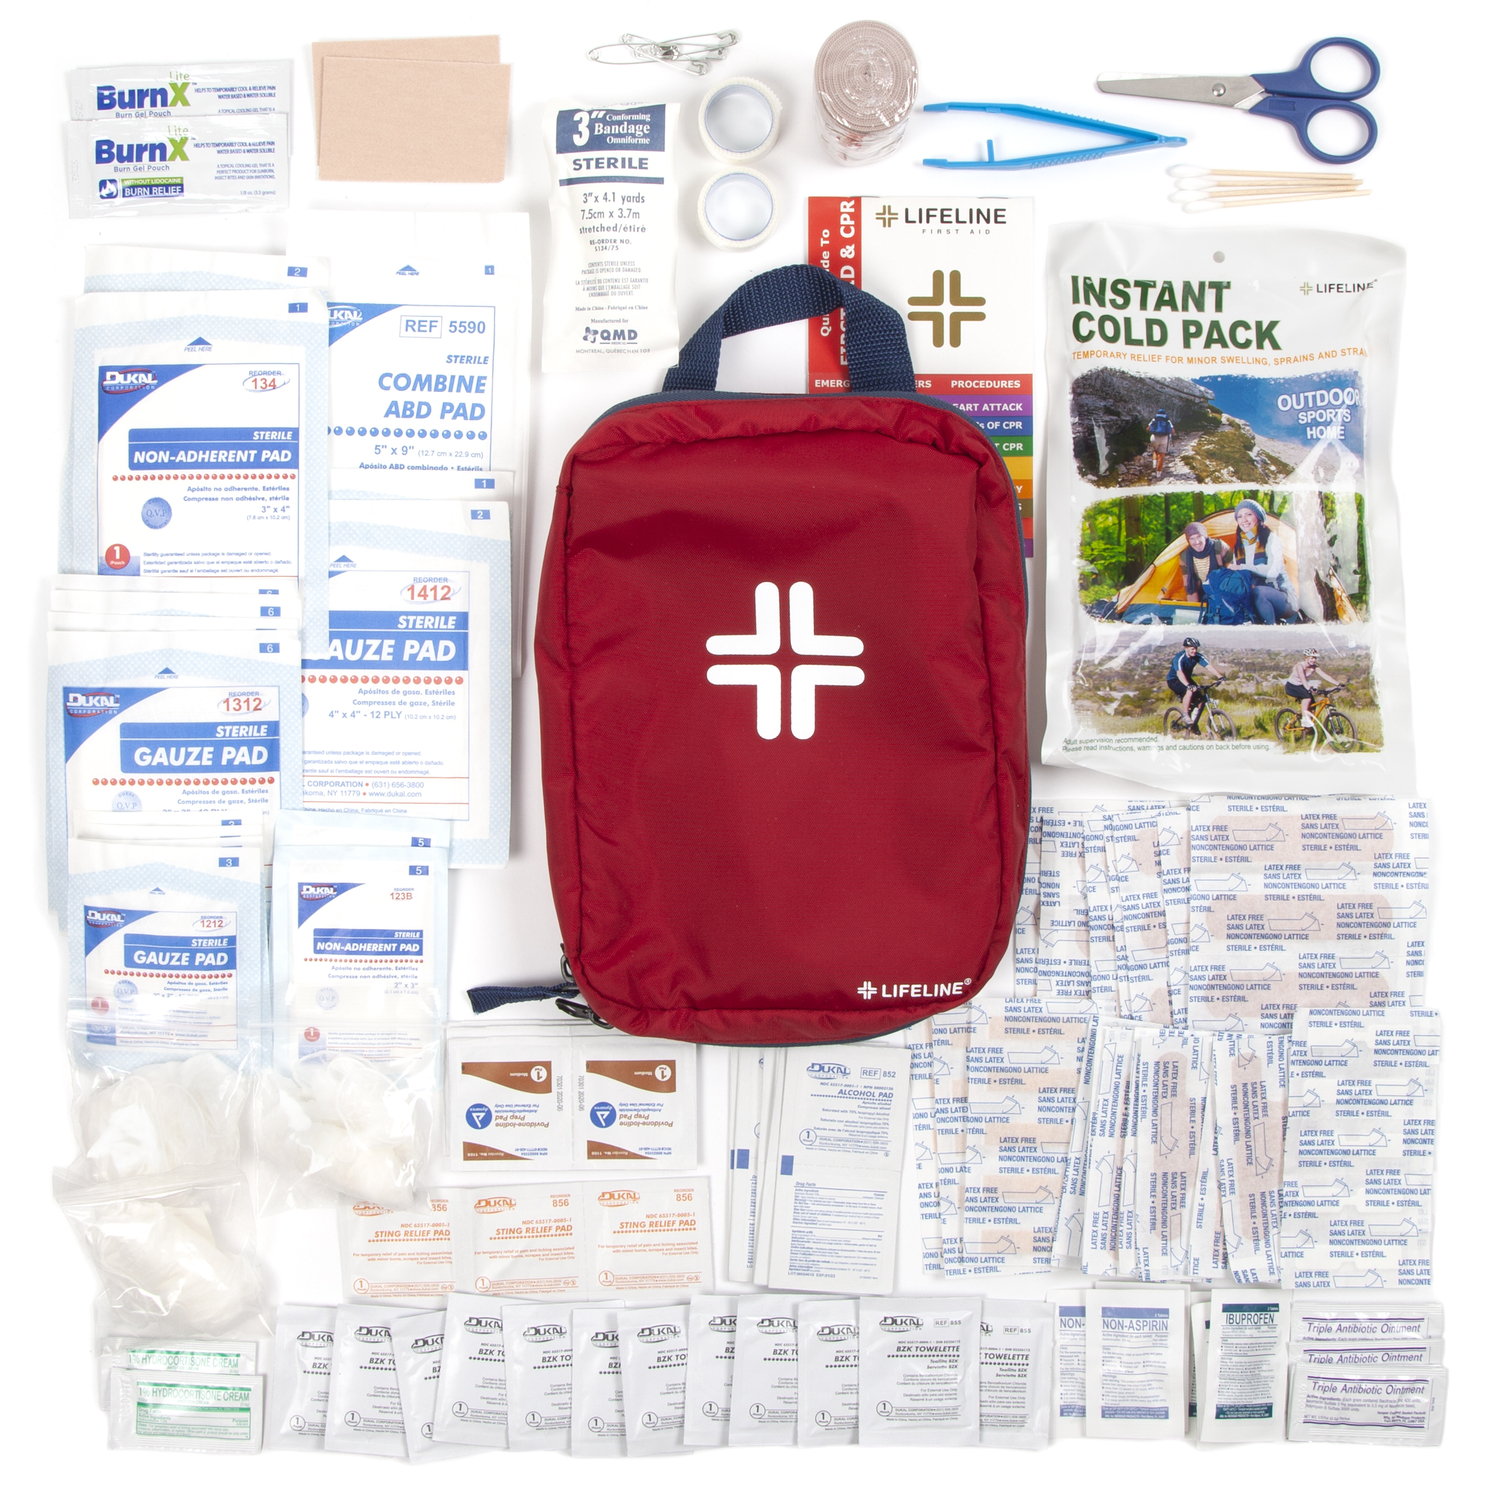 Lifeline Base Camp First Aid Kit 171 Pieces - image 3 of 3